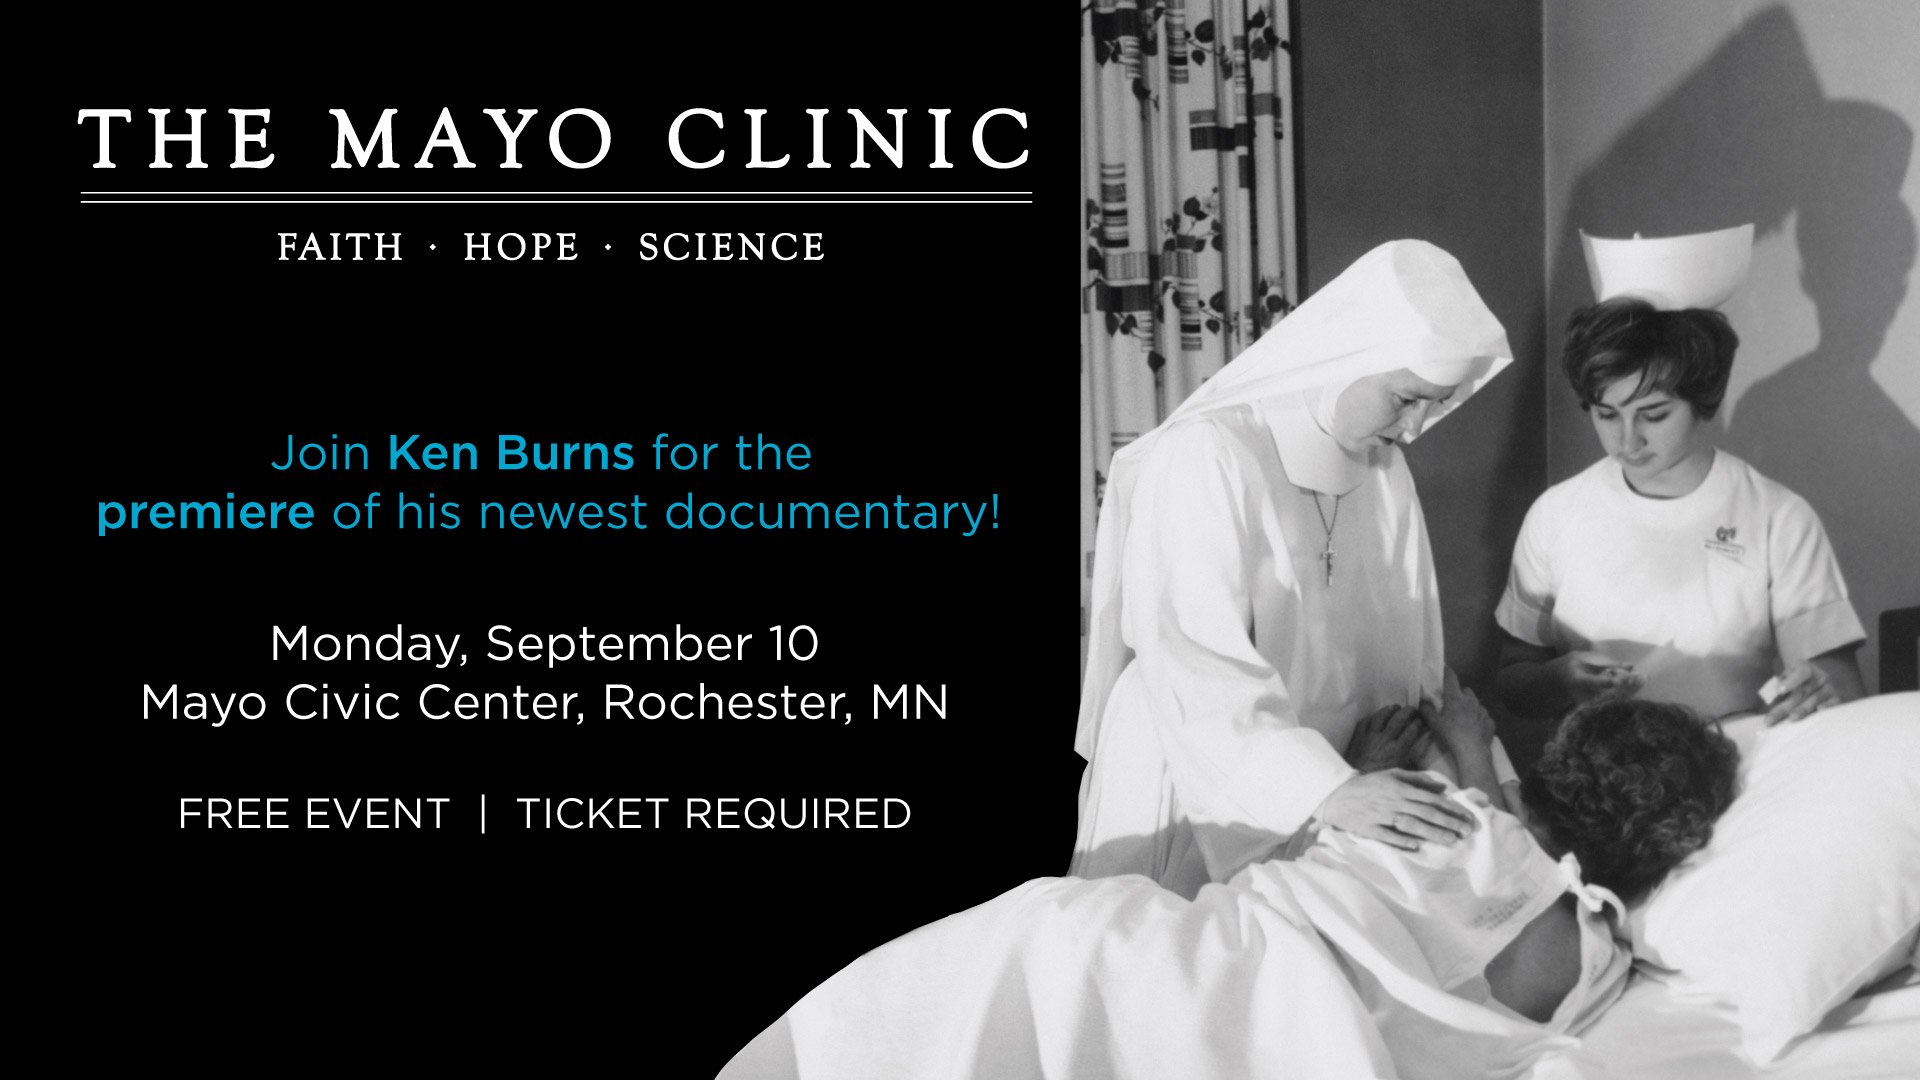 The Mayo Clinic: An Evening with Ken Burns